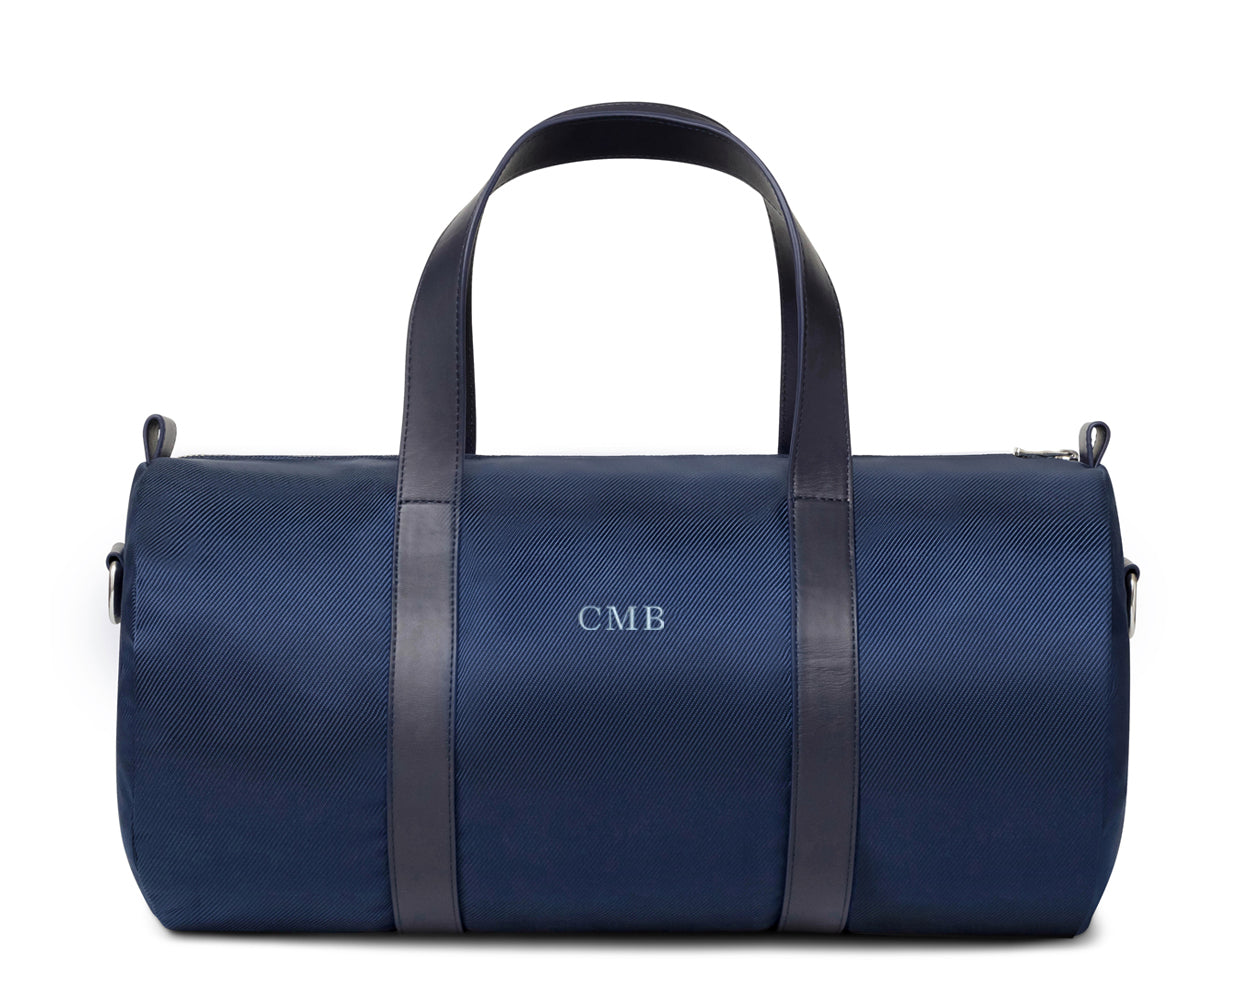 Blue banker bag with dark leather straps and embroidered lettering from Holderness and Bourne.